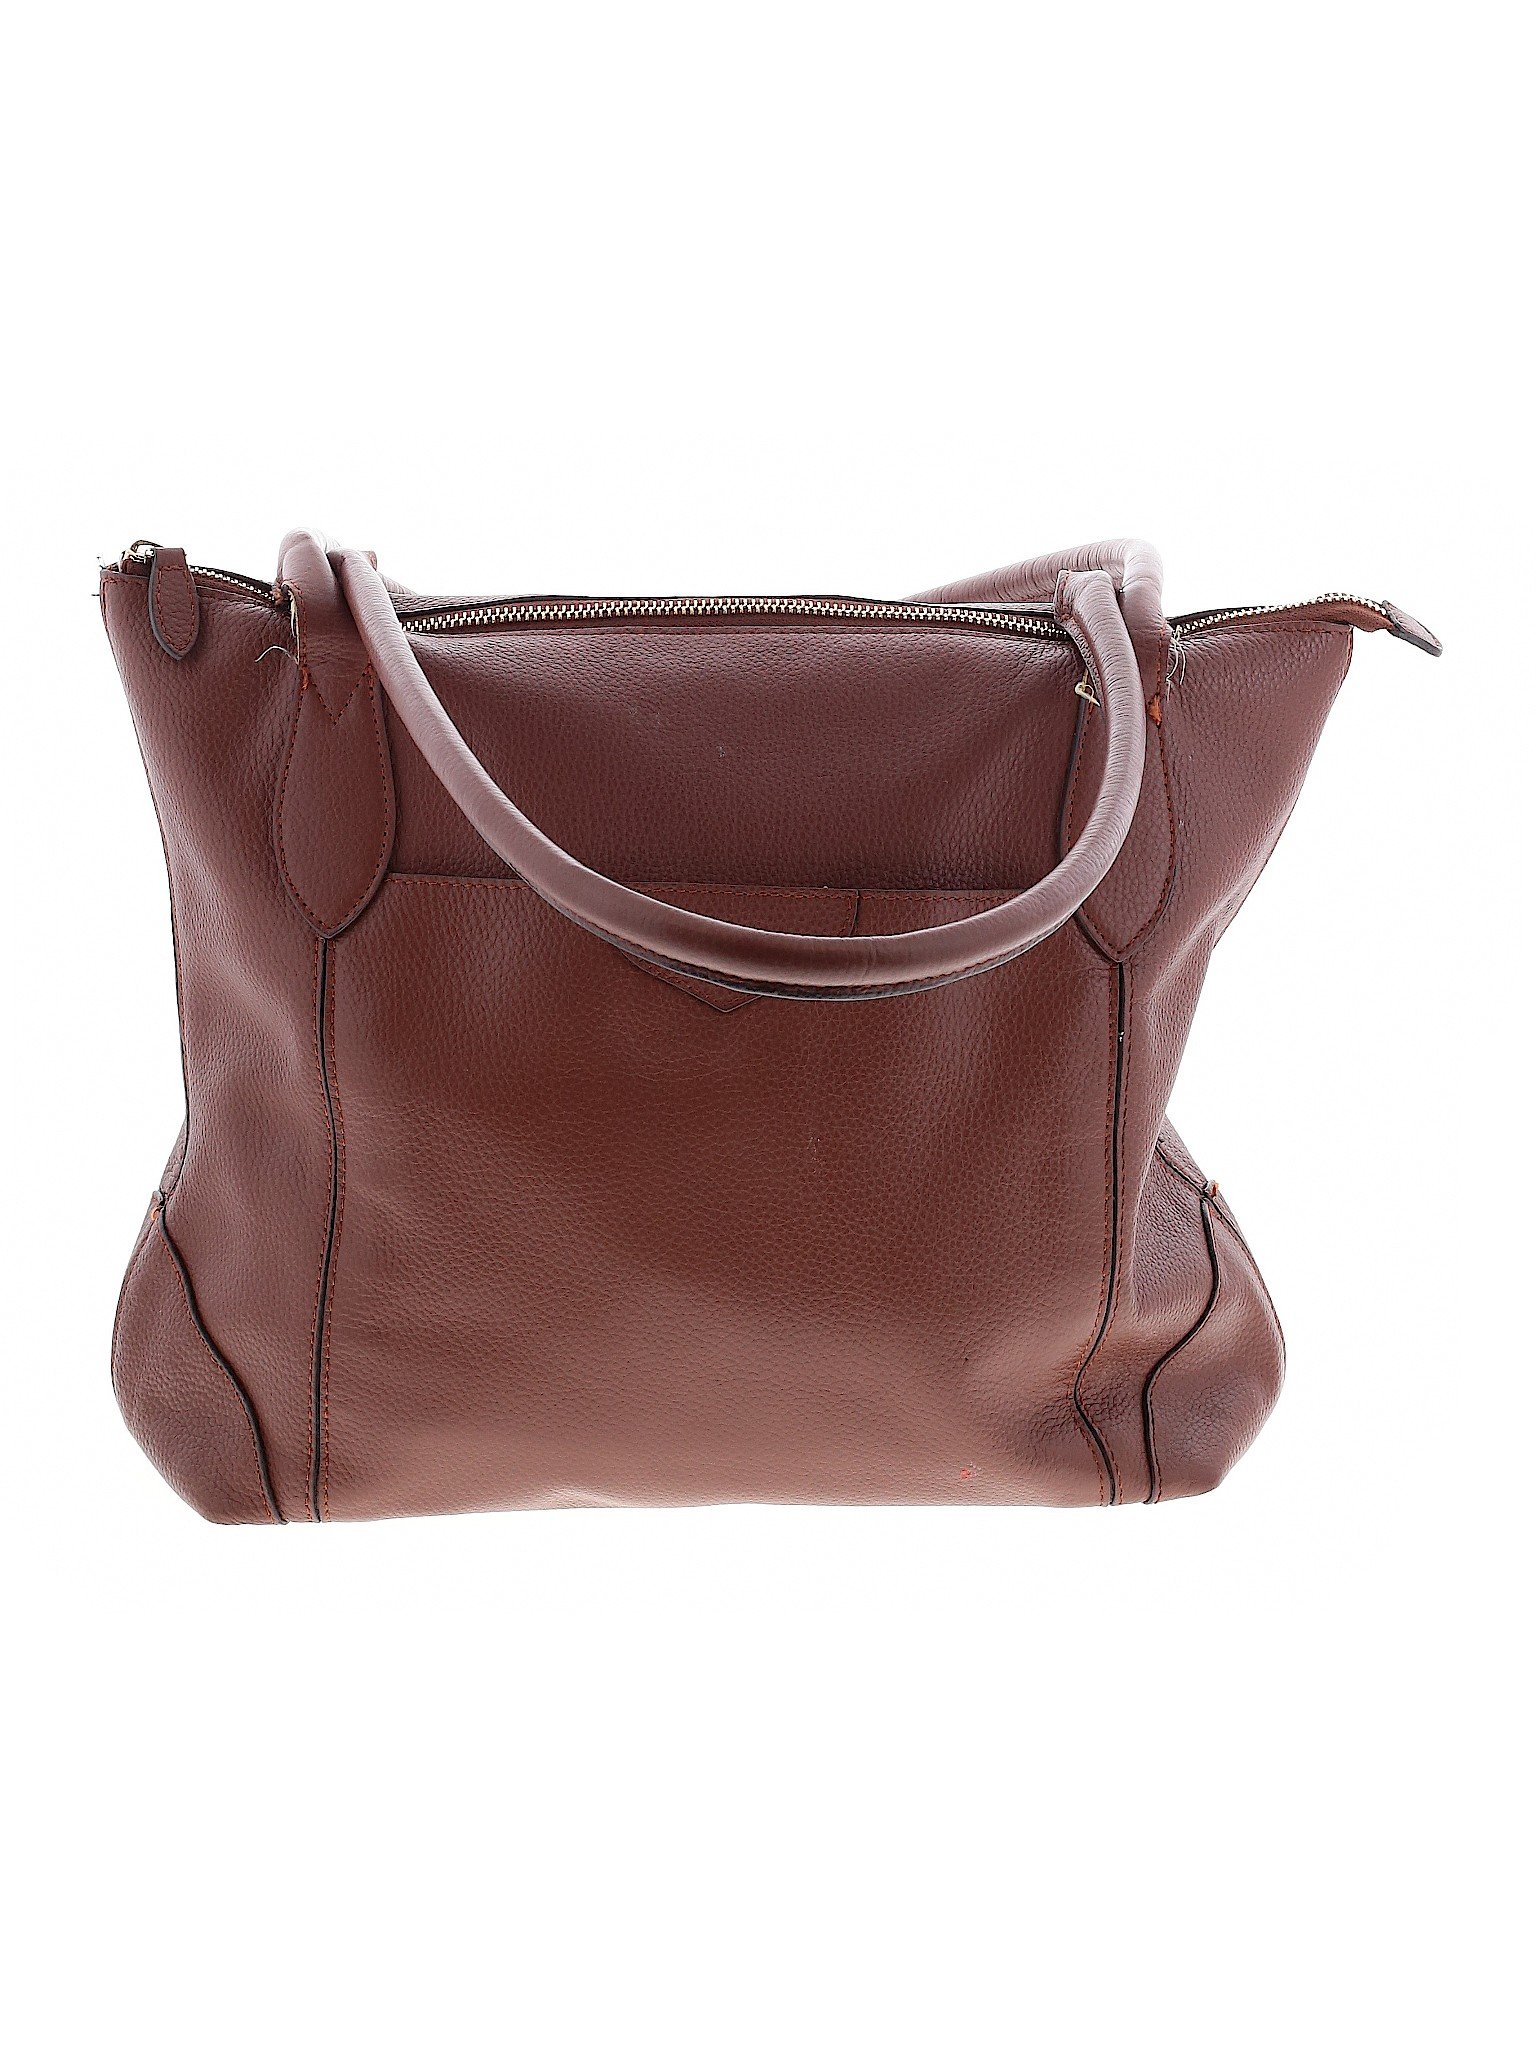 Lodis 100% Leather Solid Brown Leather Shoulder Bag One Size - 78% off ...